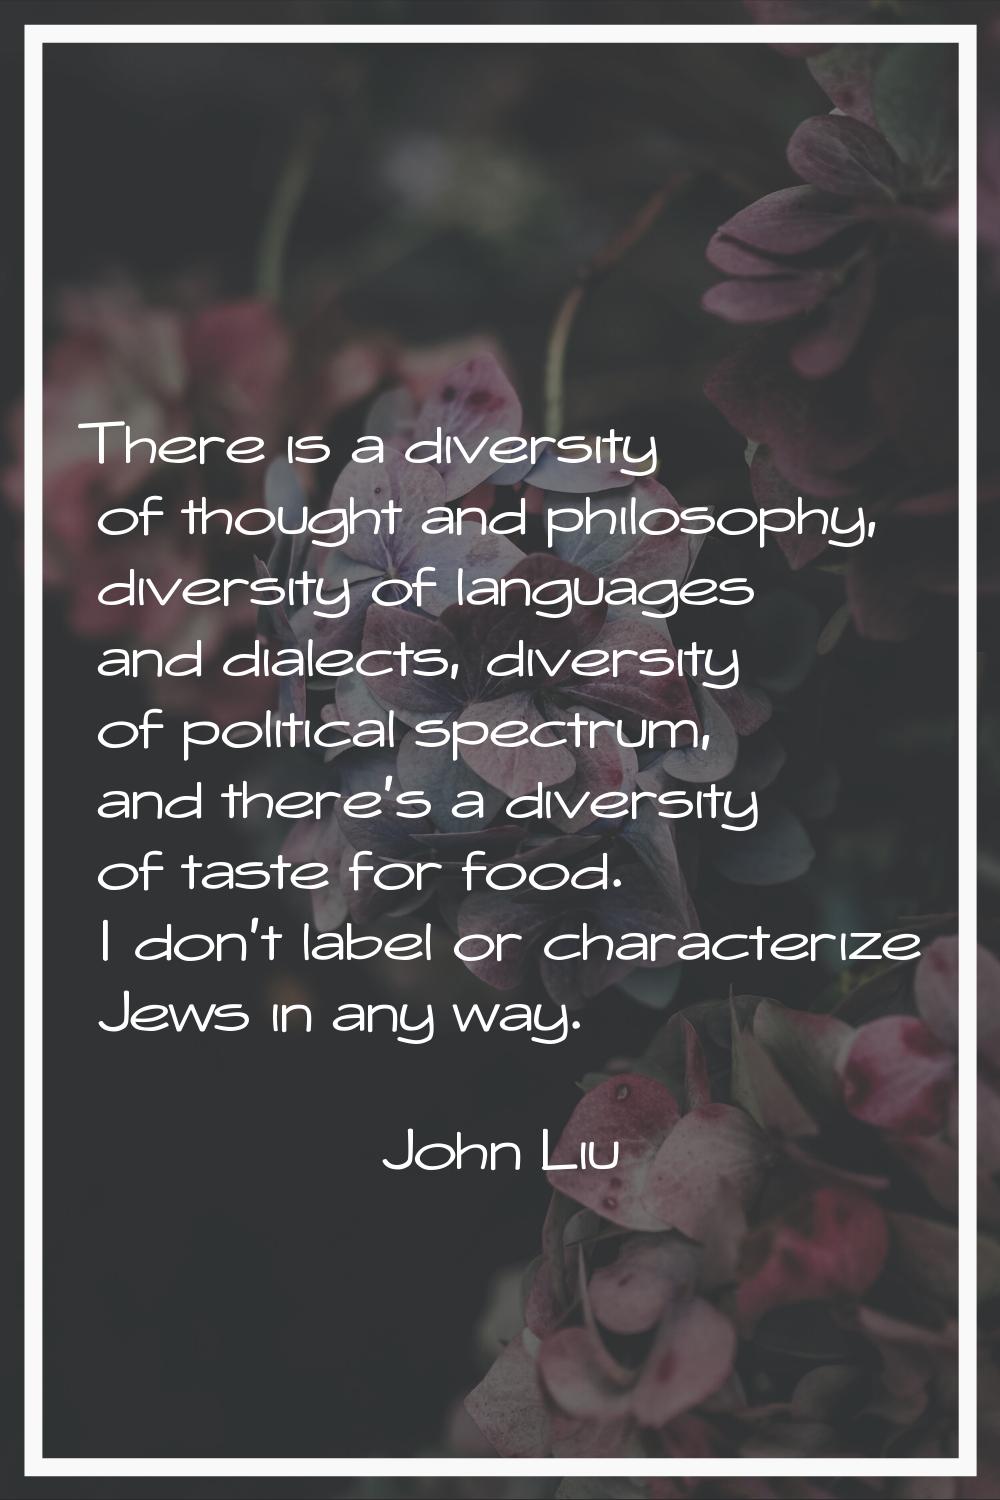 There is a diversity of thought and philosophy, diversity of languages and dialects, diversity of p